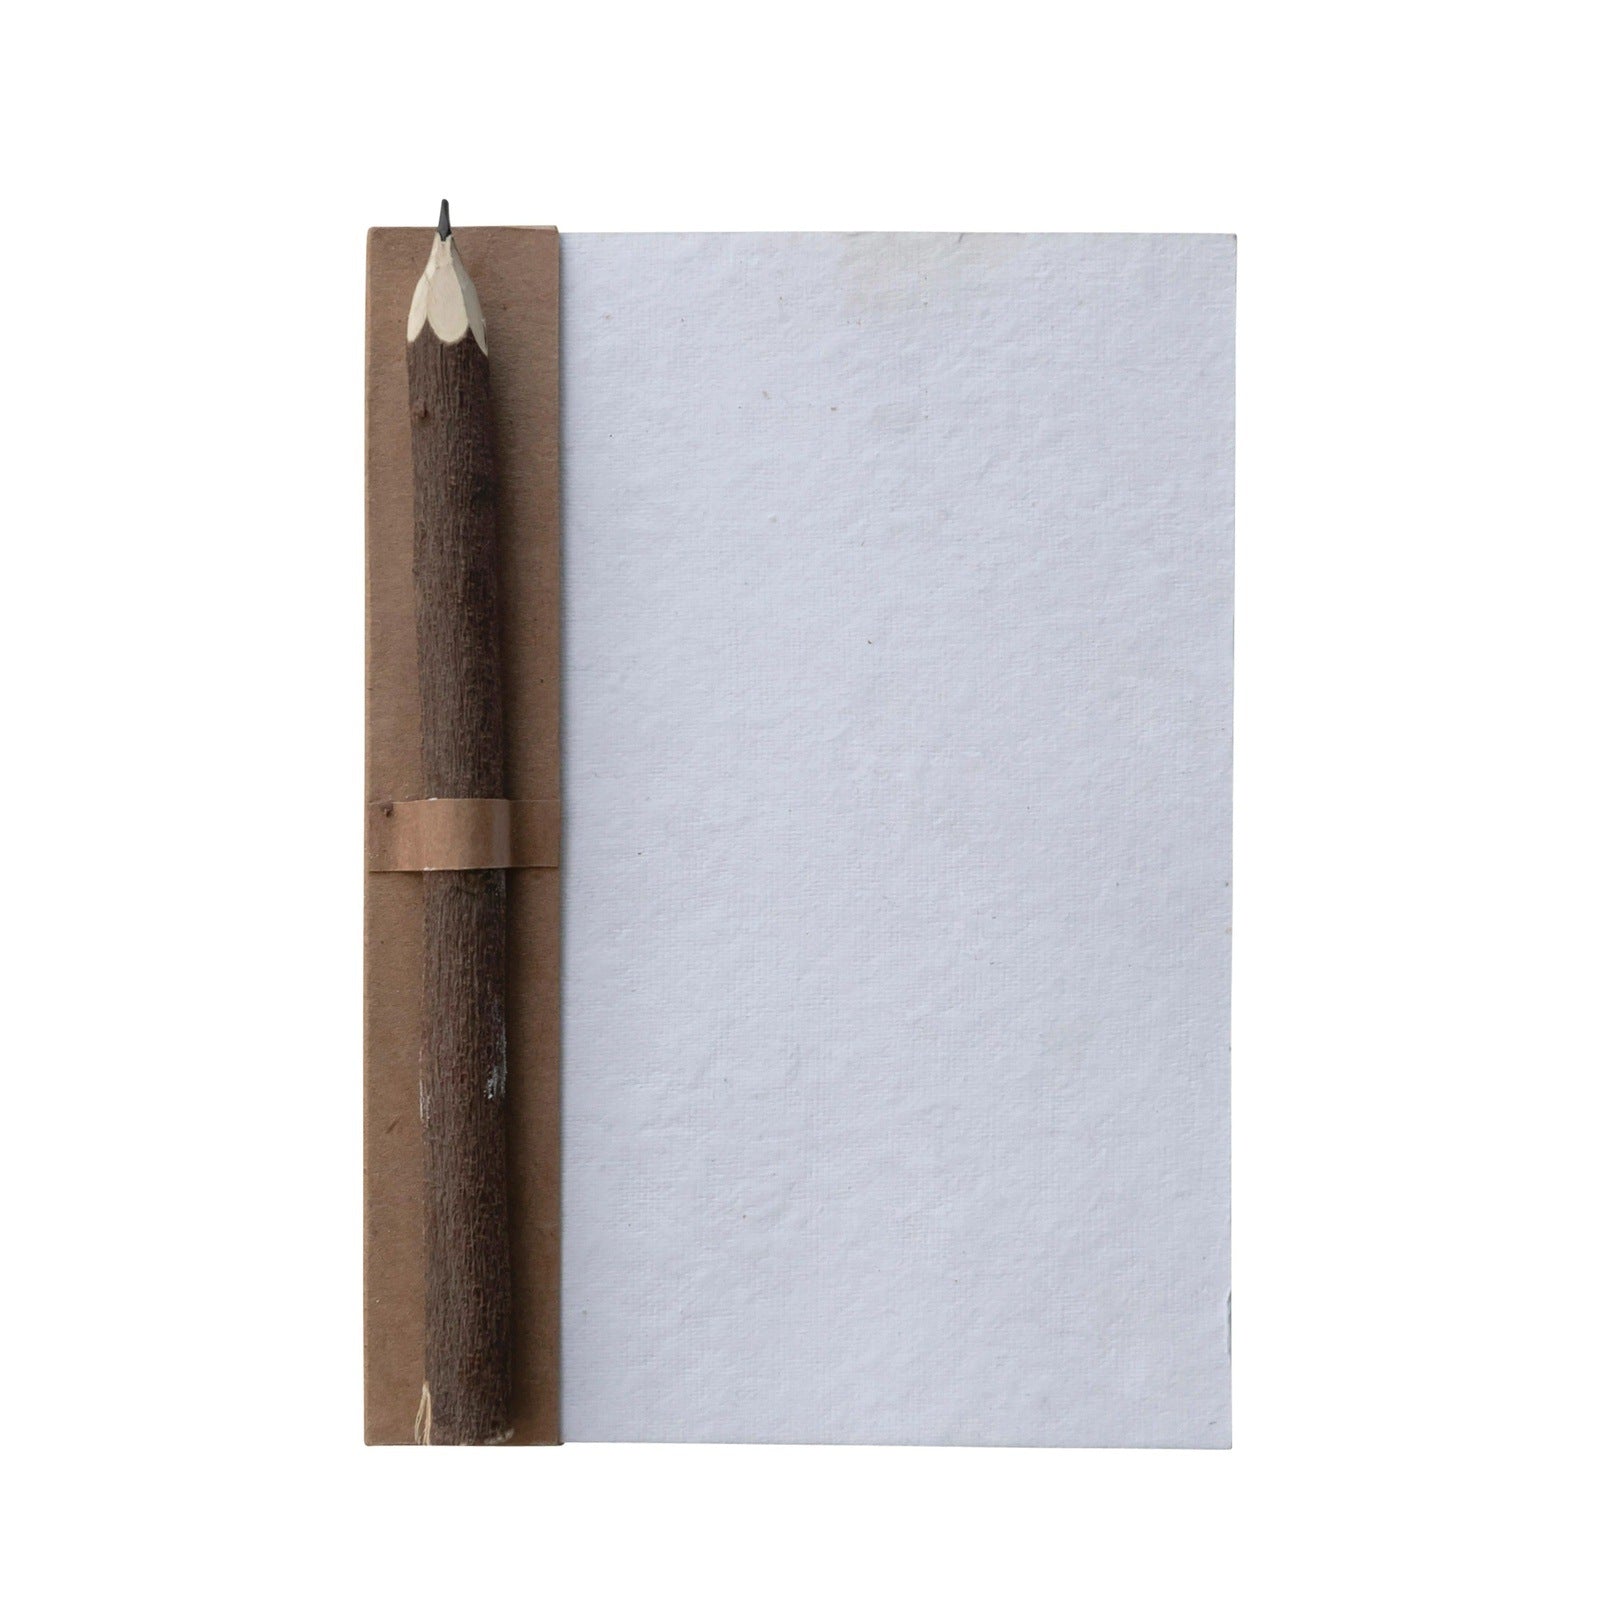 Hand Made Paper Journal With Carved Wood Pencil Set